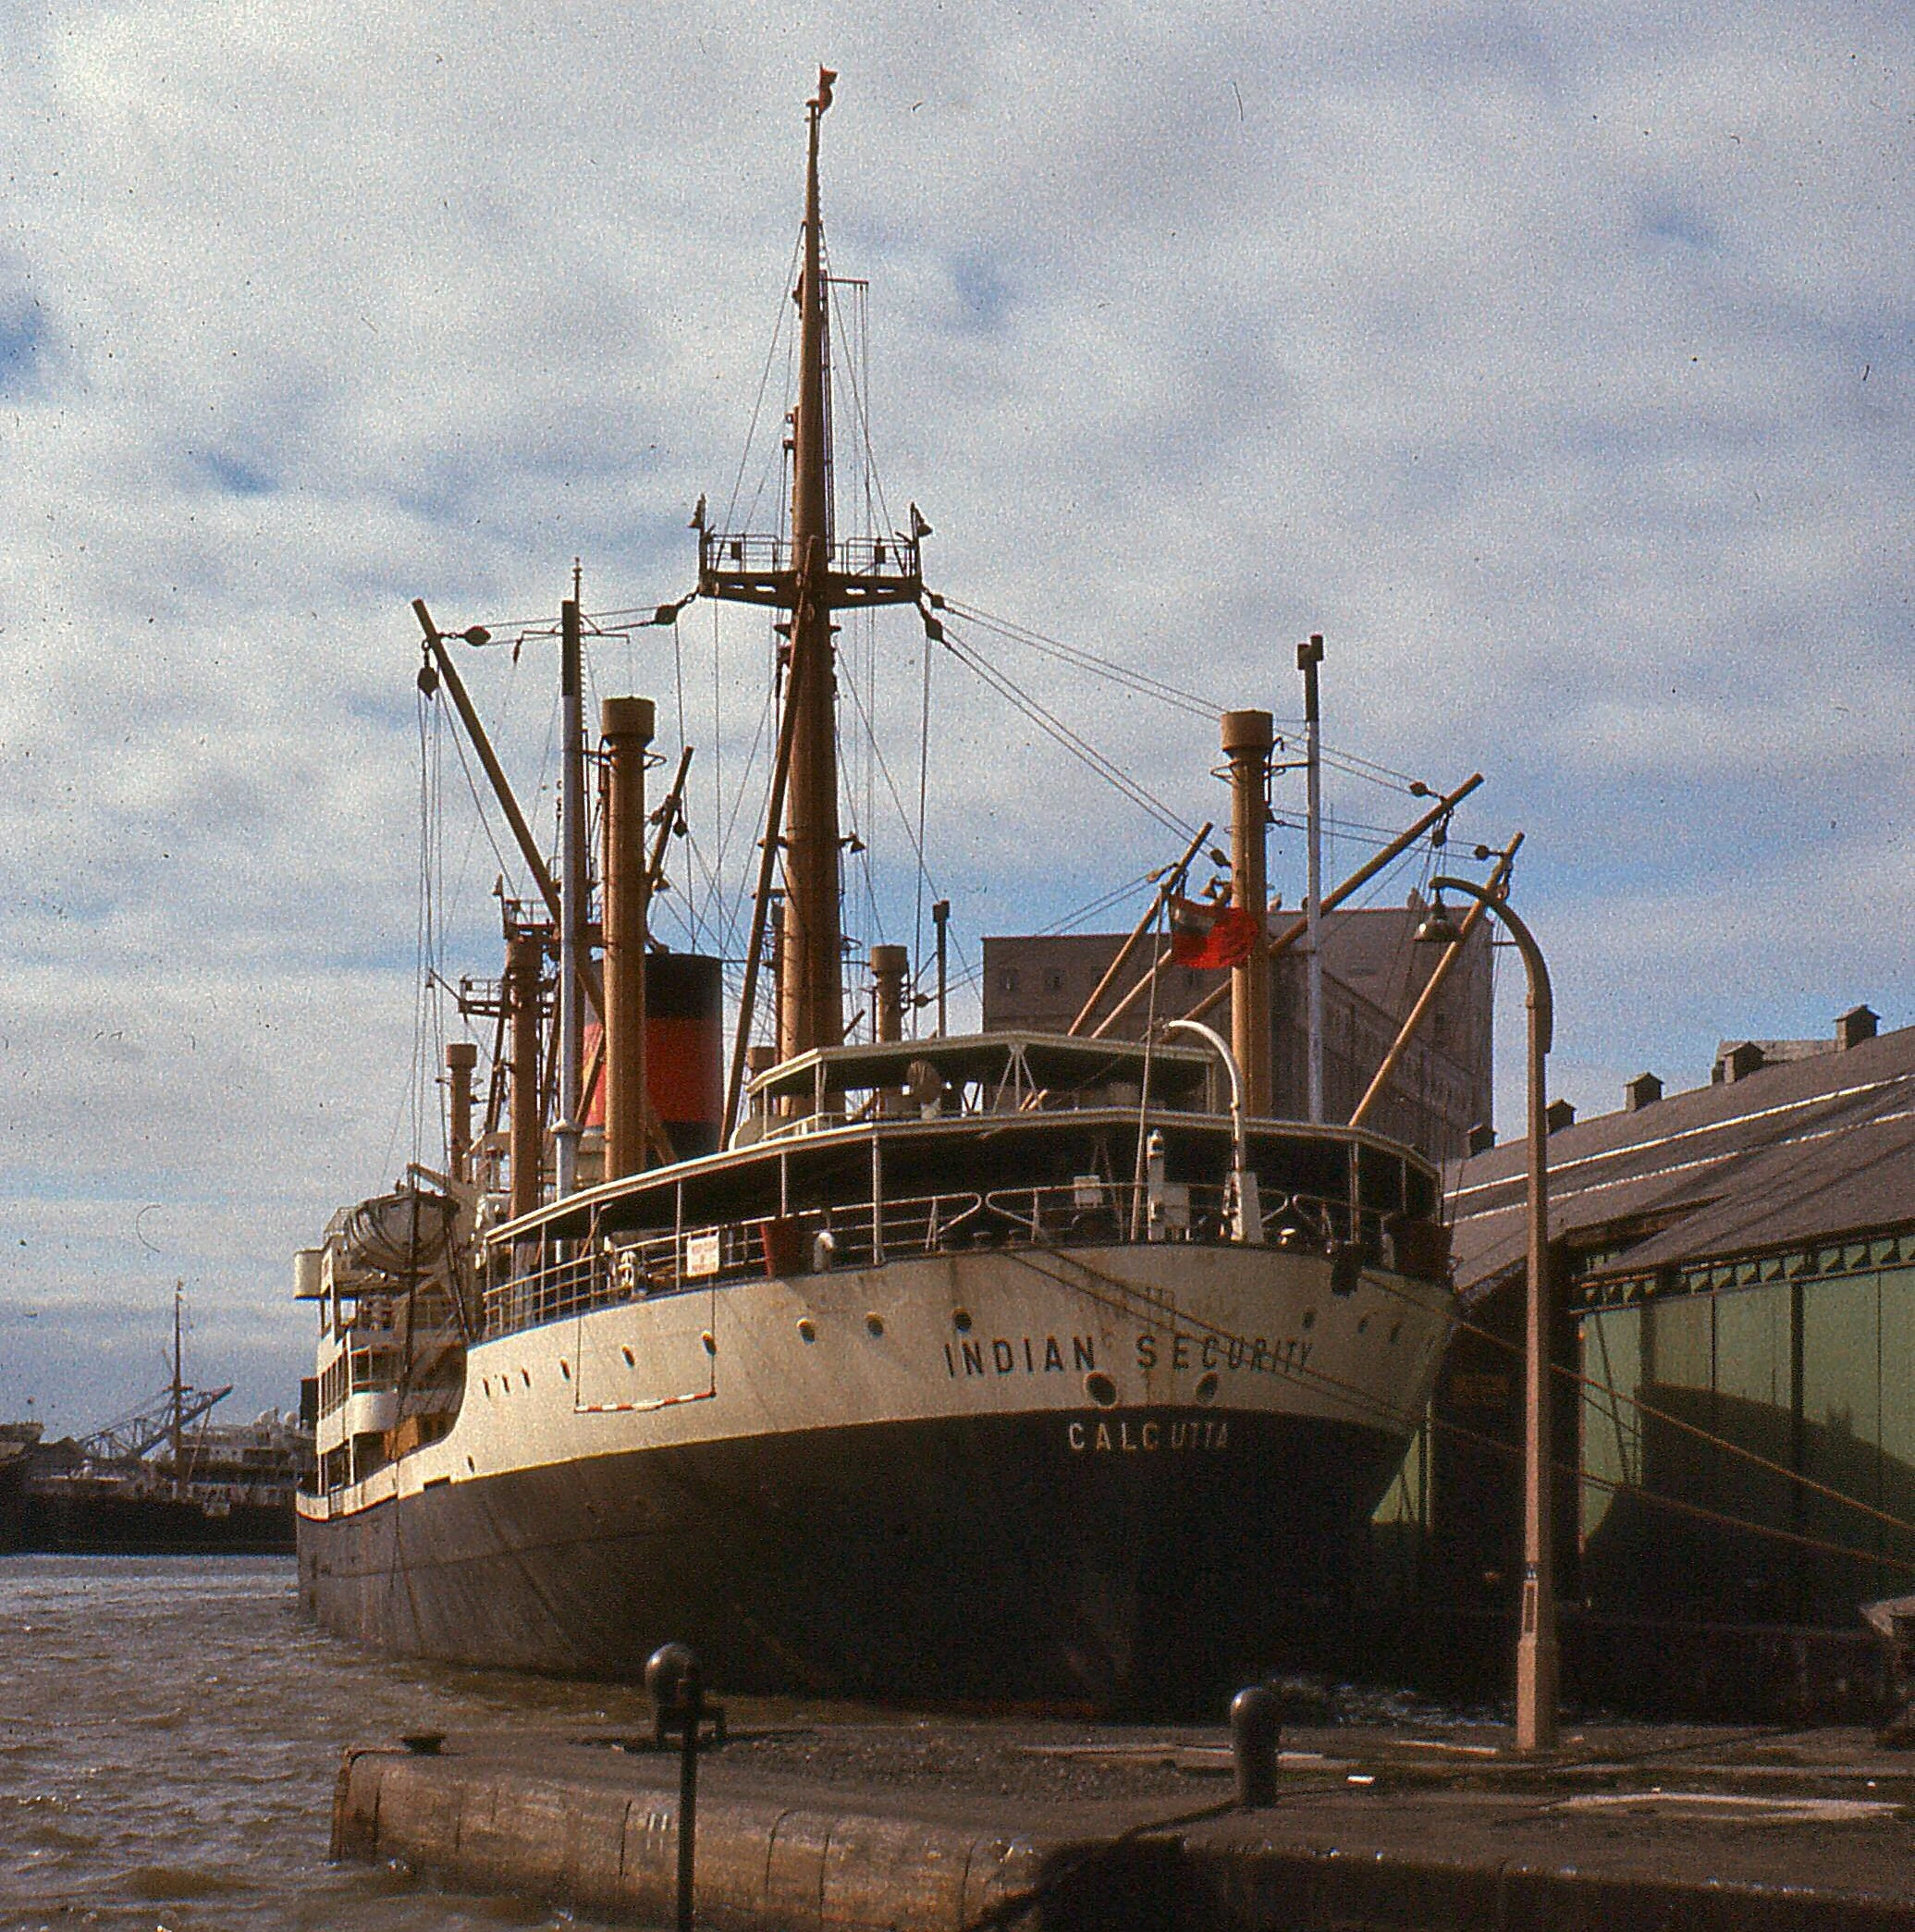 A Calcutta boat moored in Warrington in the sixties (Image: Eddie Whitham)